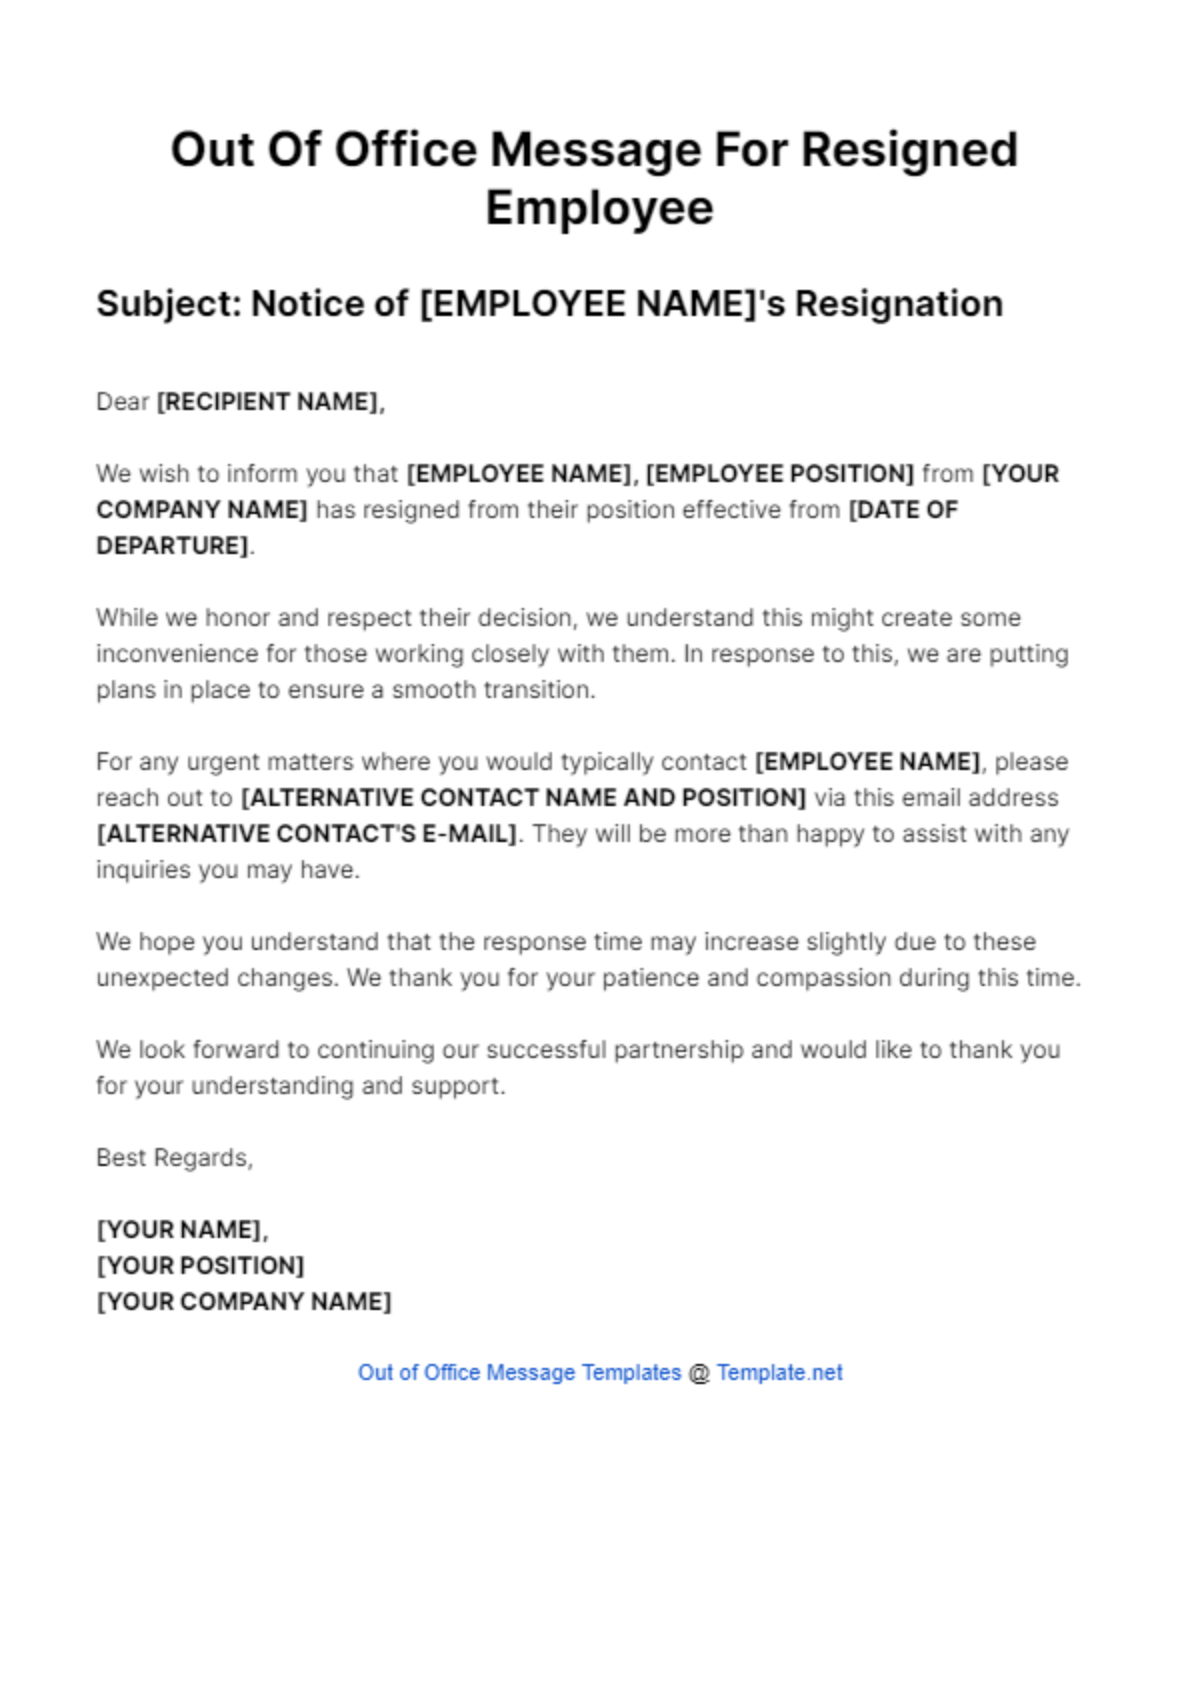 Out Of Office Message For Resigned Employee Template